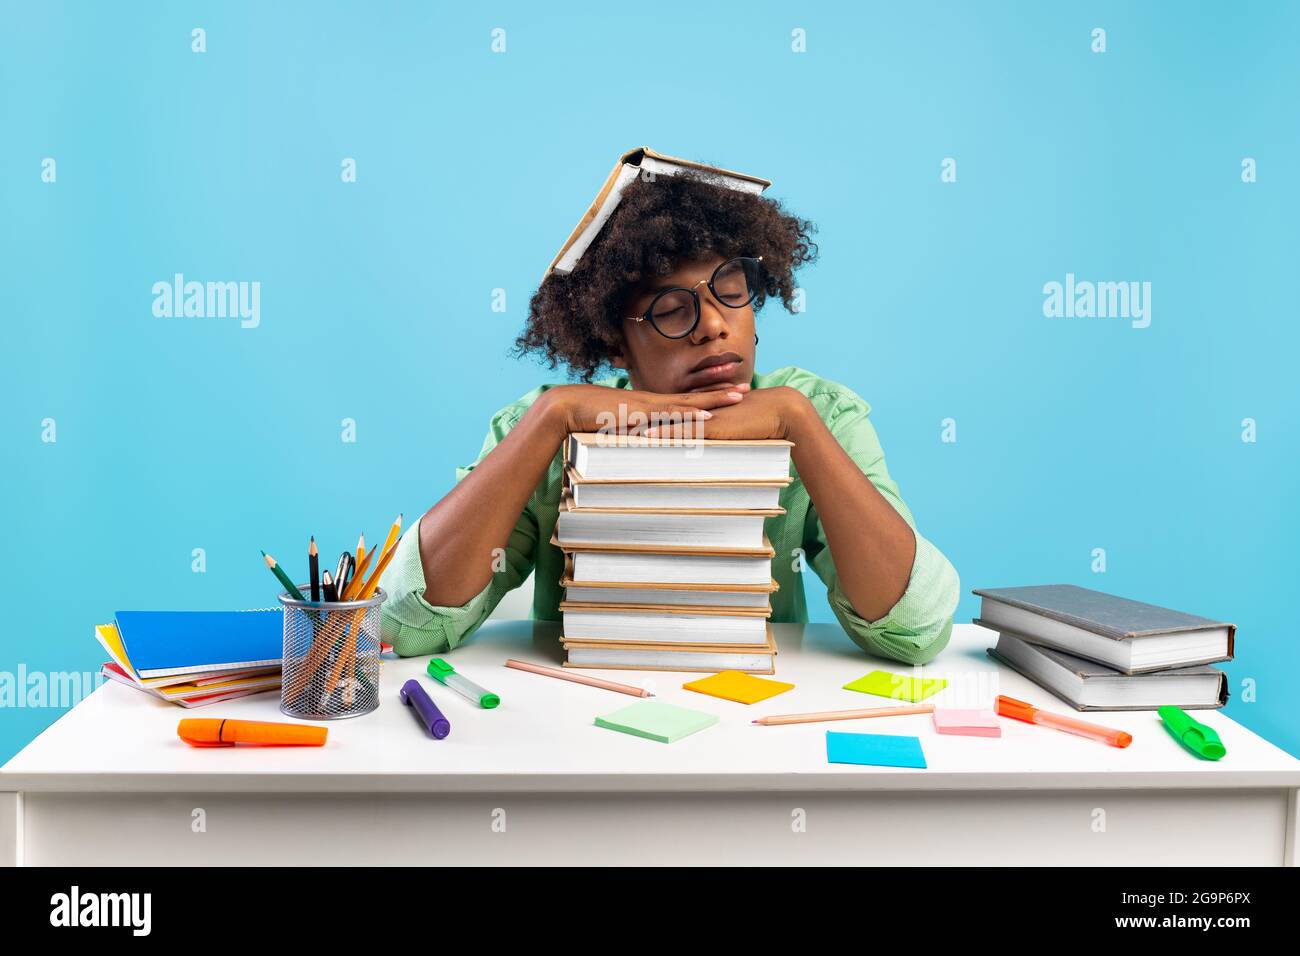 Tired african american student guy having nap on books, being exhausted during preparing for exams, blue background Stock Photo